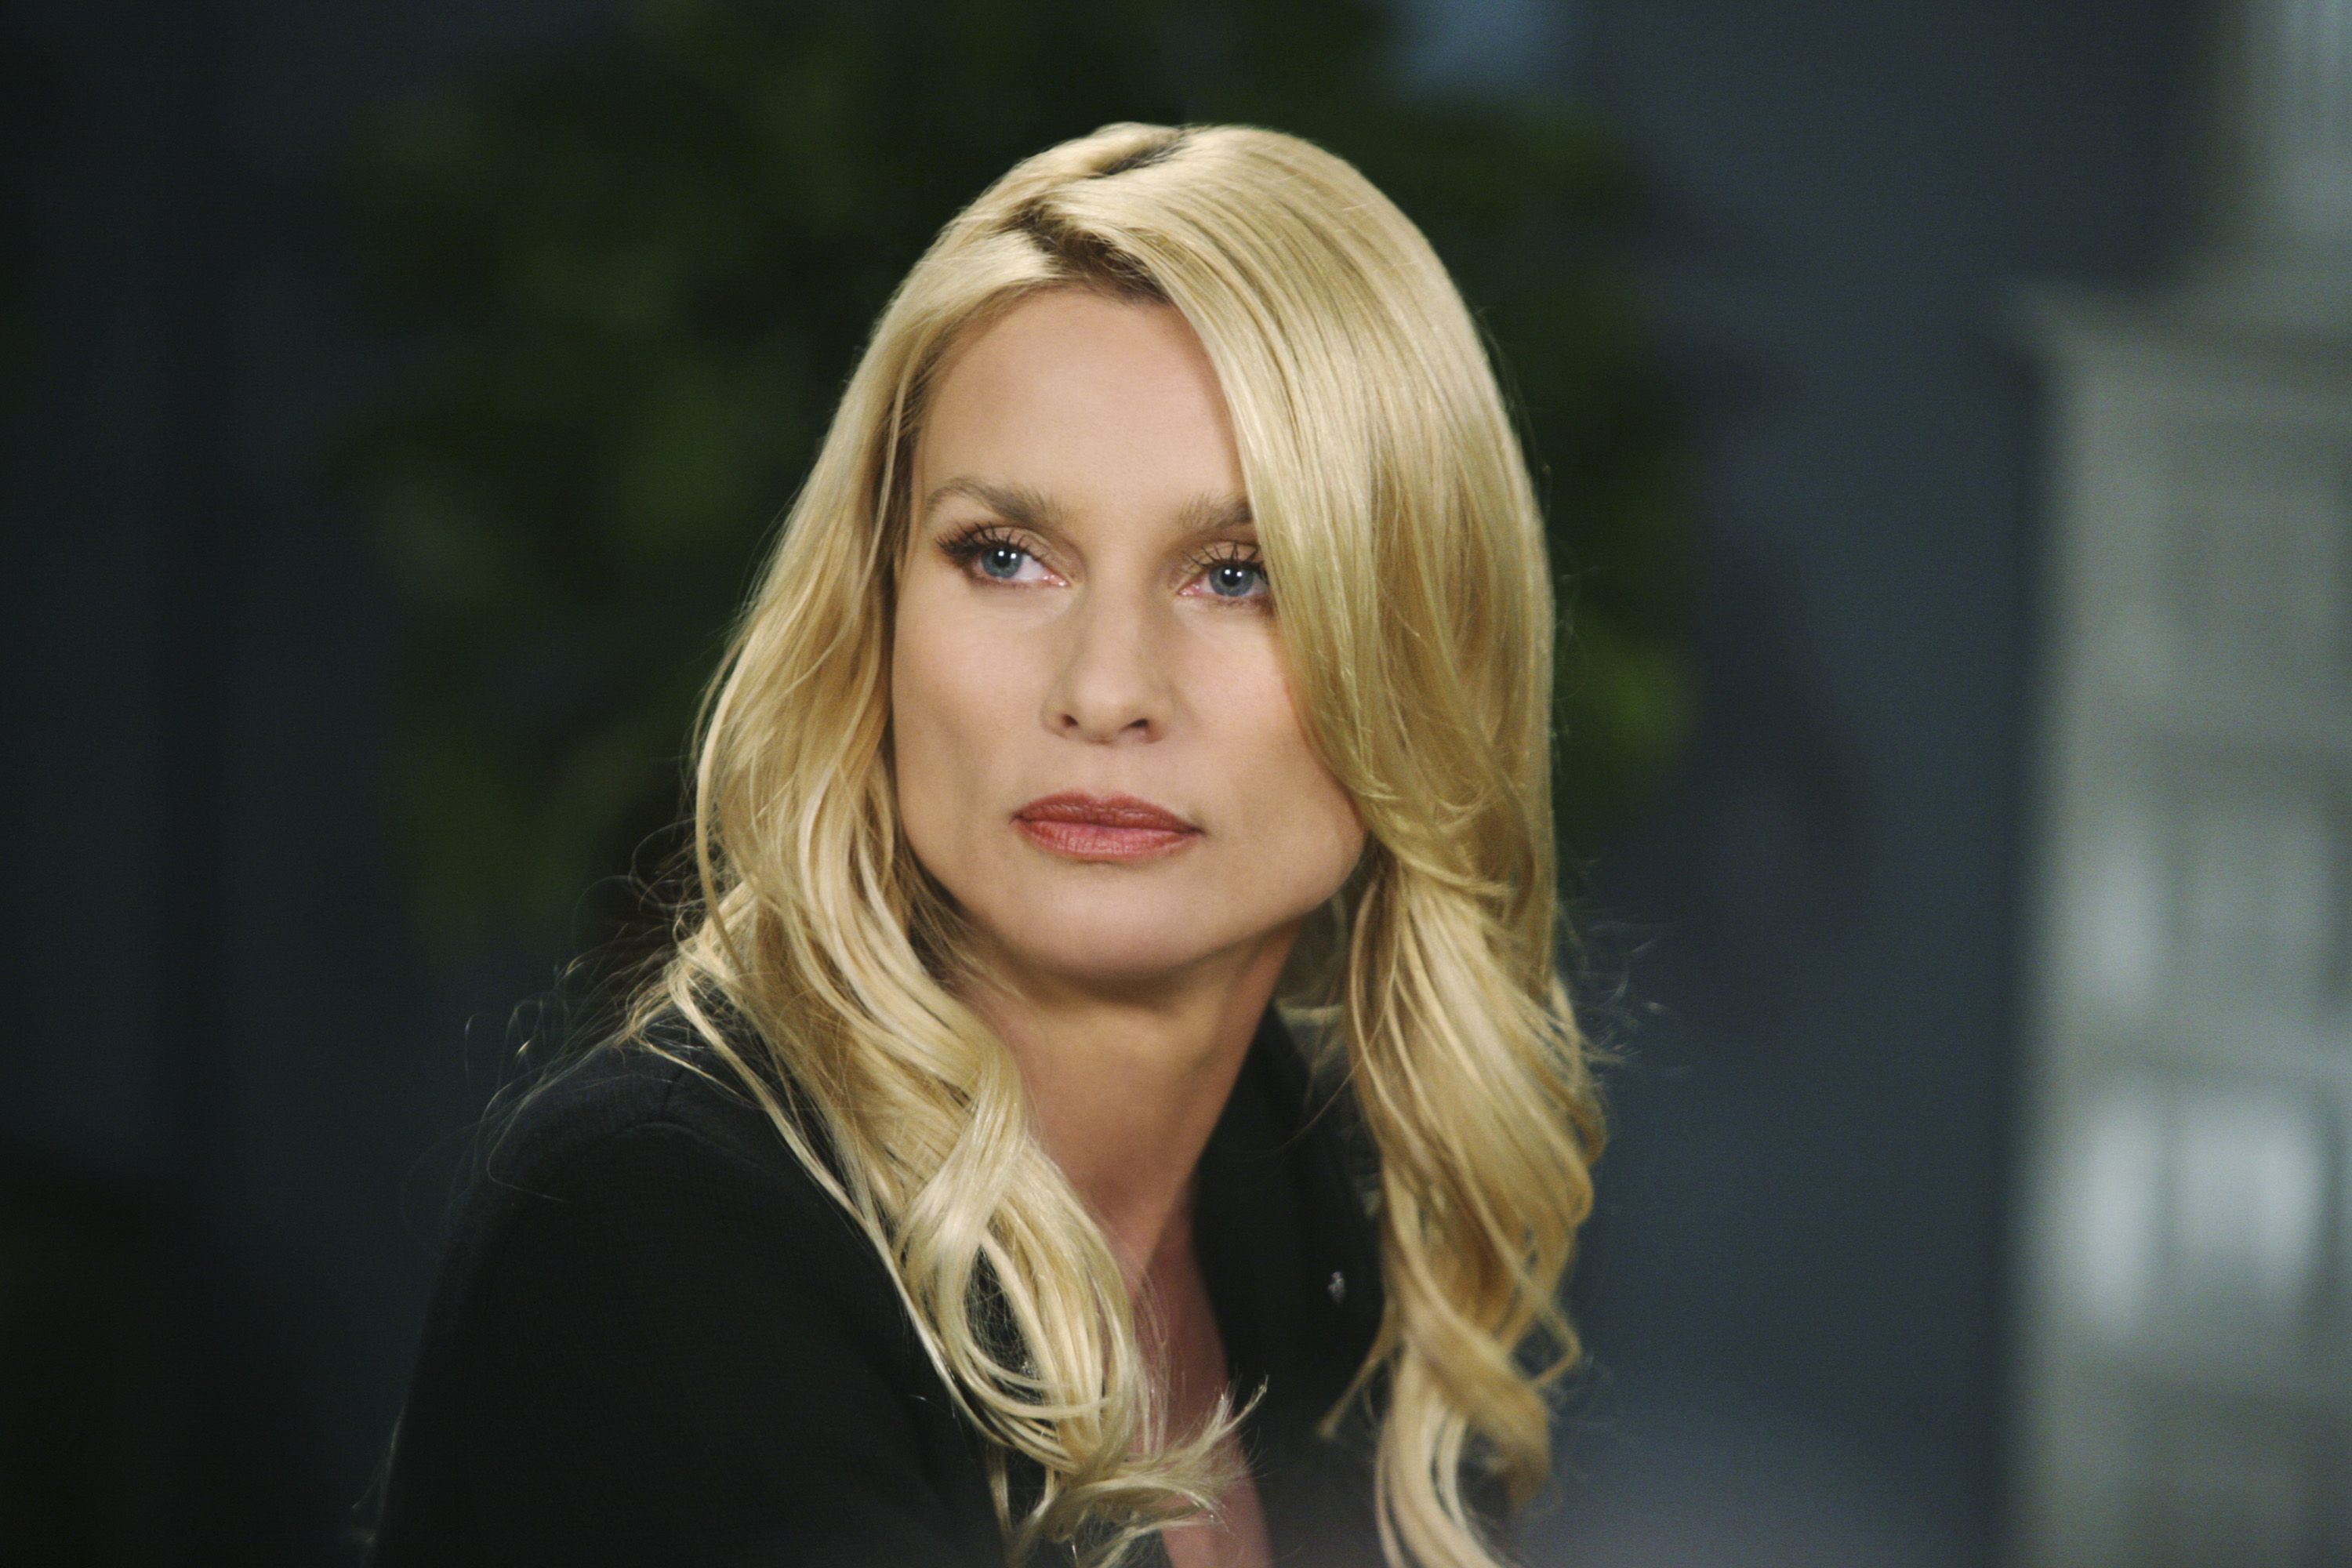 Desperate Housewives star Nicollette Sheridan says her exit